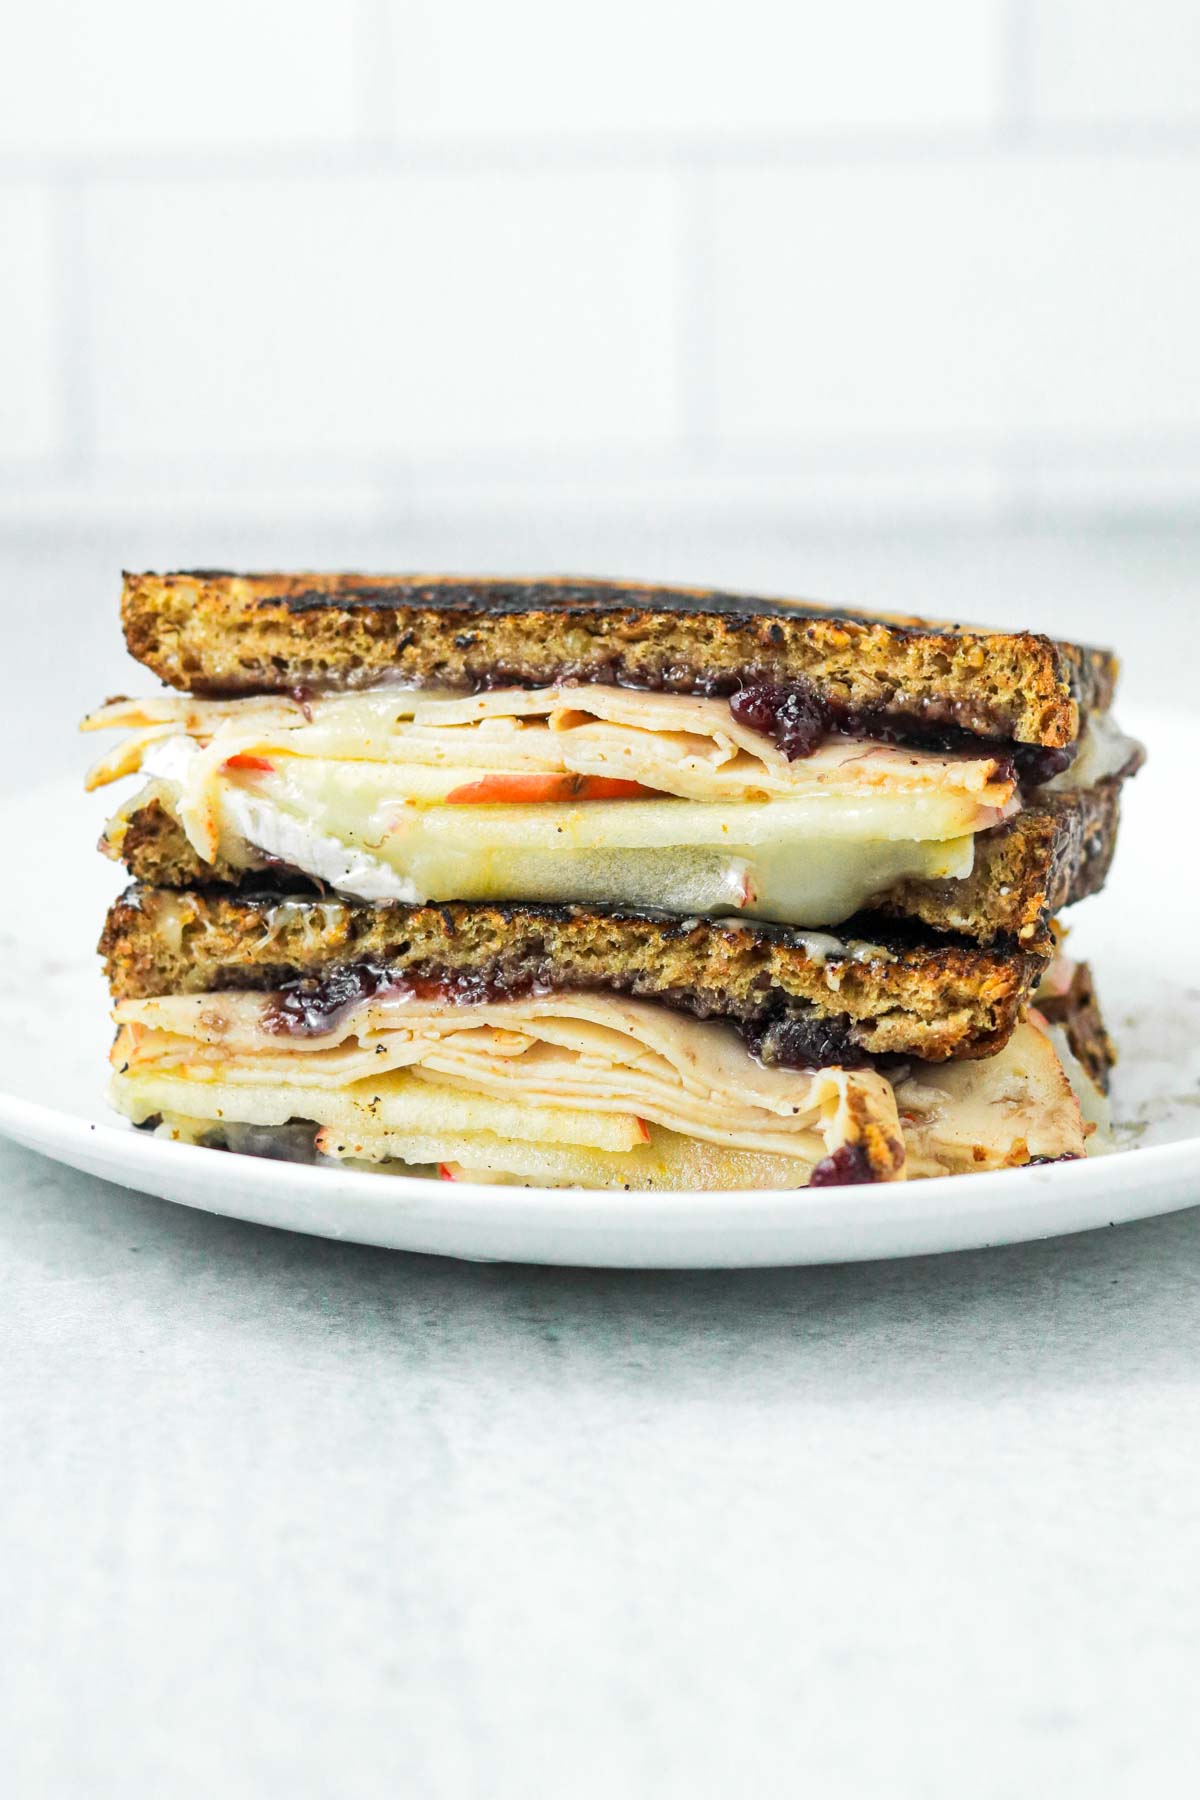 Apple & Brie Grilled Cheese